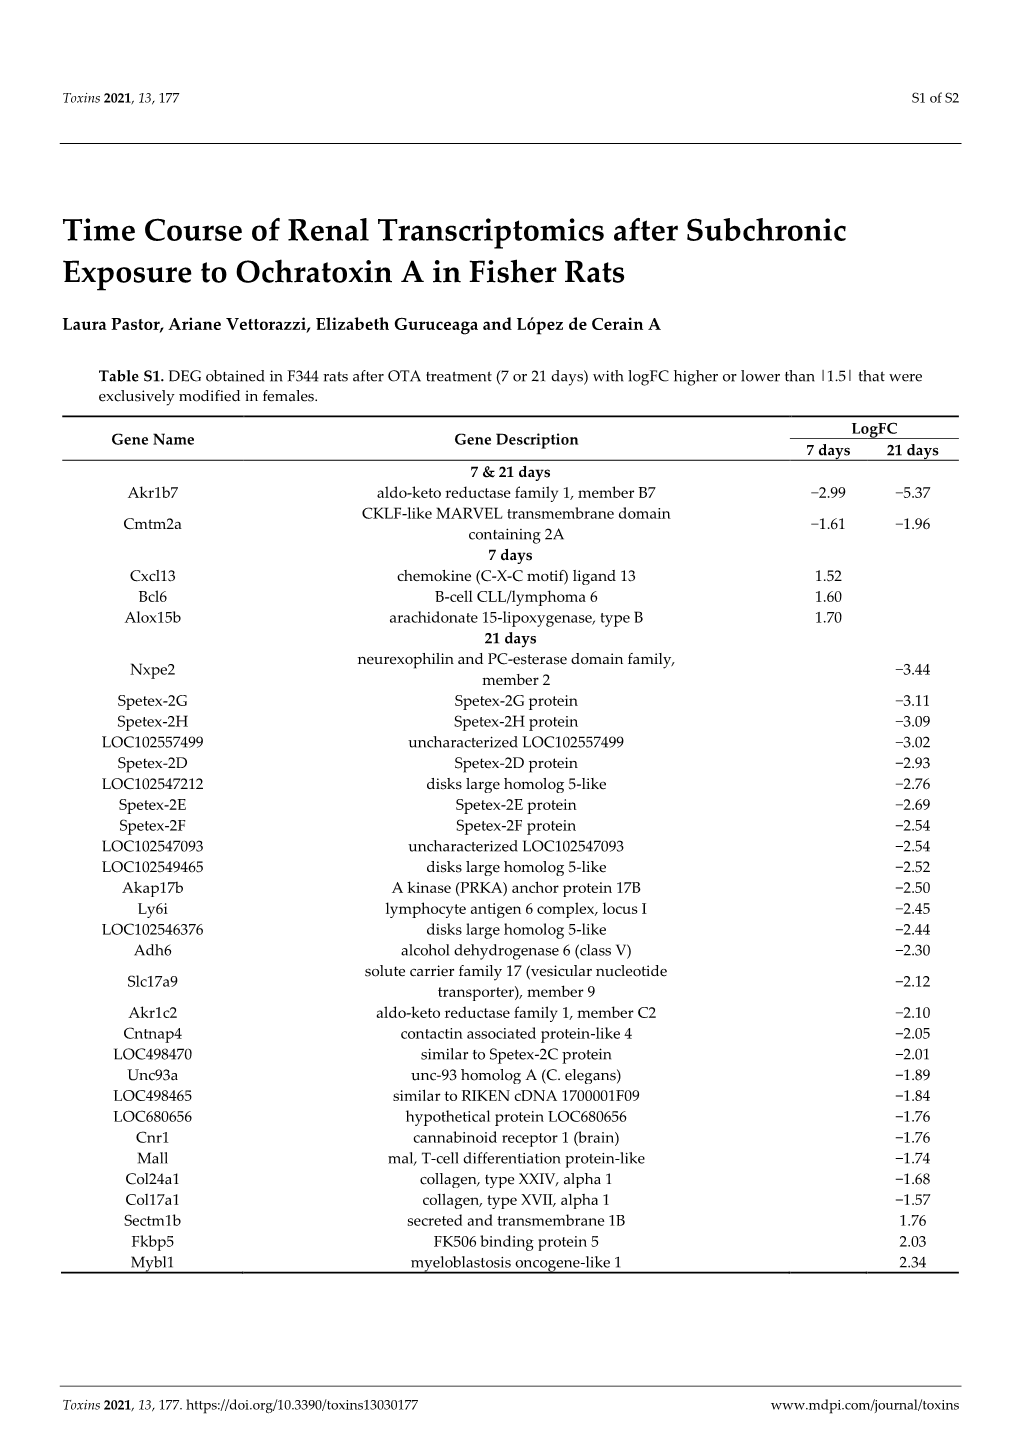 Time Course of Renal Transcriptomics After Subchronic Exposure to Ochratoxin a in Fisher Rats